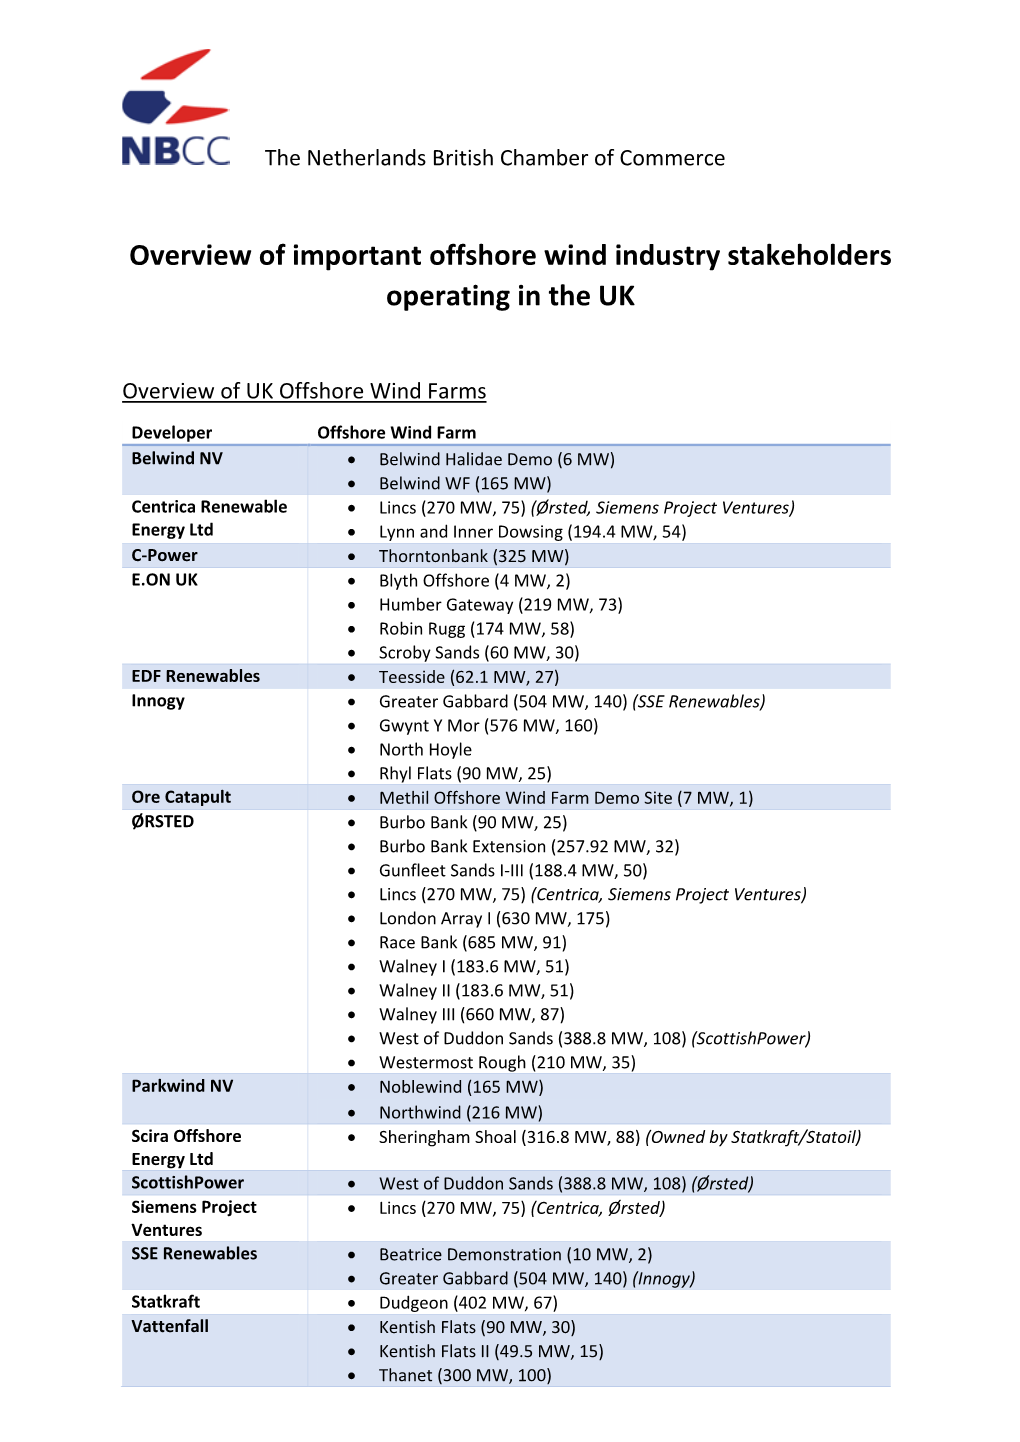 Overview of Important Offshore Wind Industry Stakeholders Operating in the UK